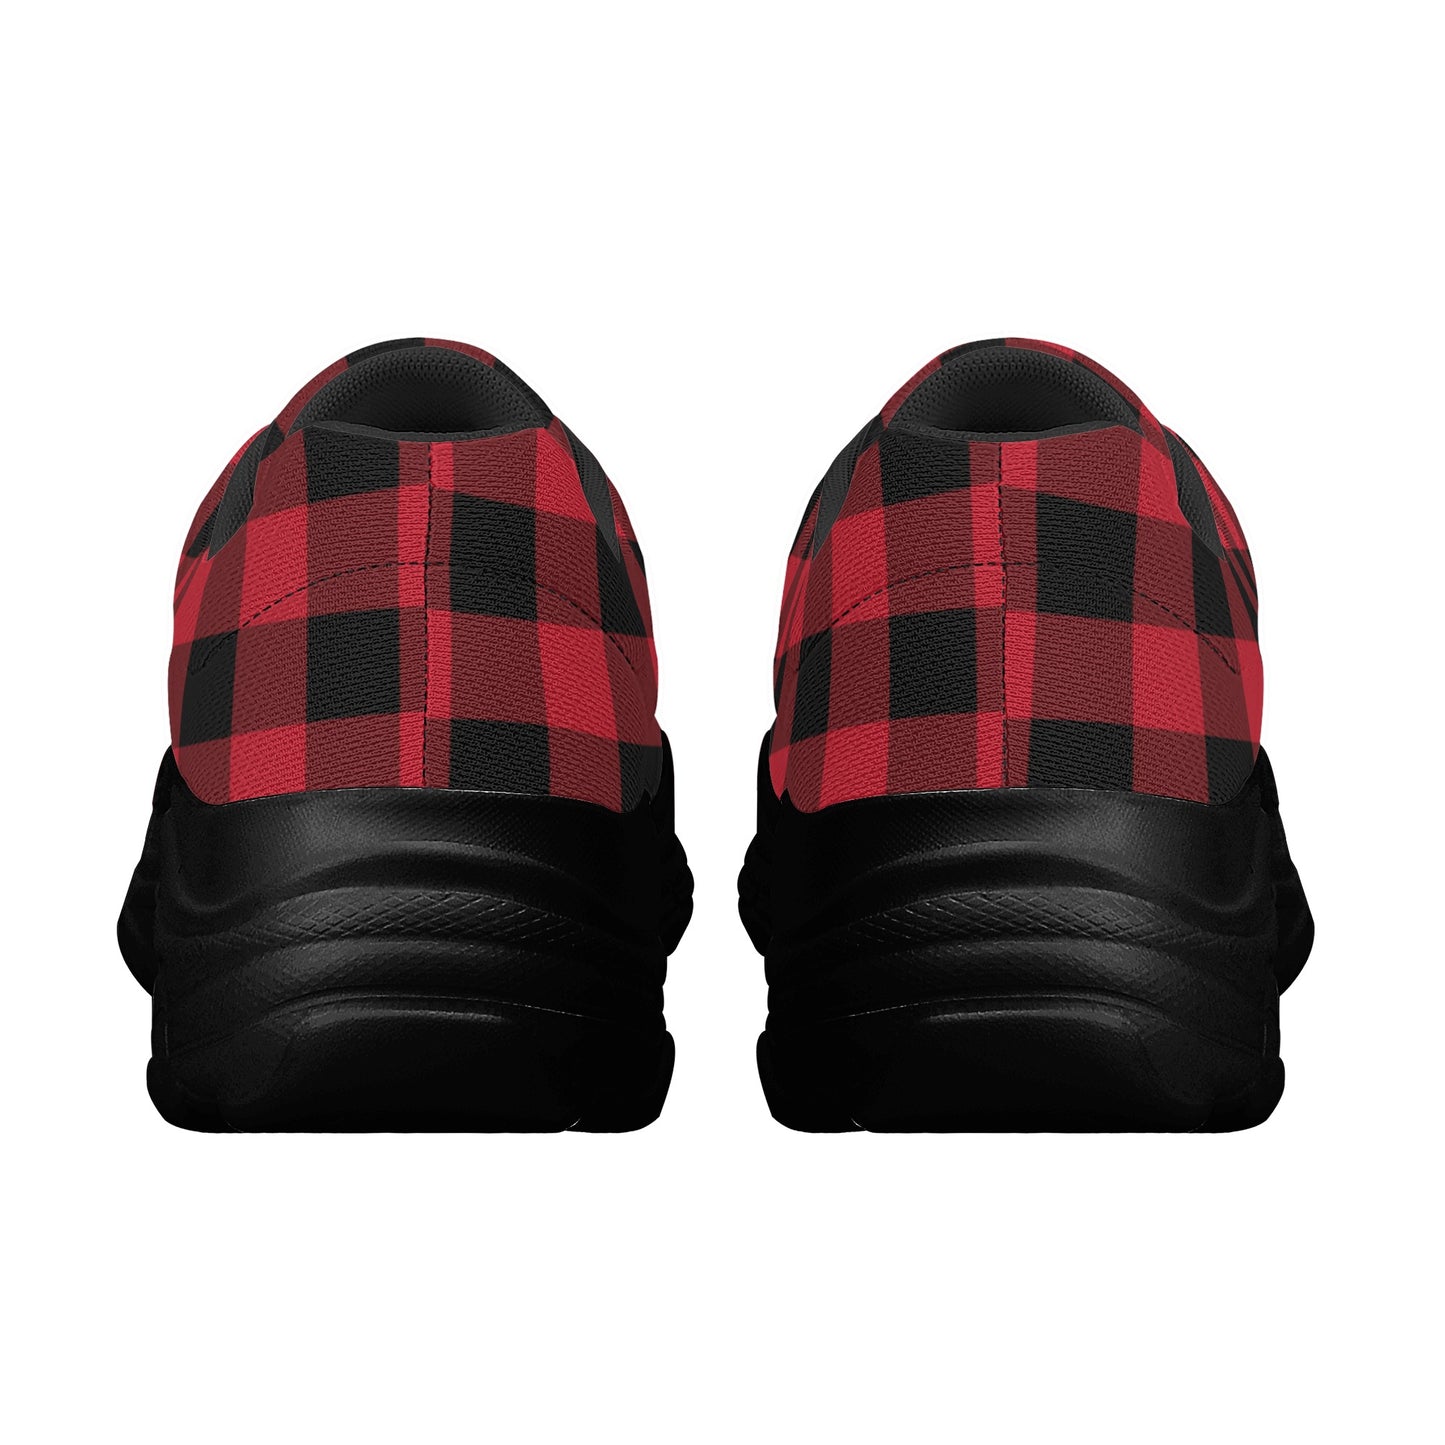 Red Buffalo Plaid Men's Chunky Shoes, Black Checkered Lace Up Exercise Unique Designer Custom Canvas Casual Streetwear Sneakers Starcove Fashion